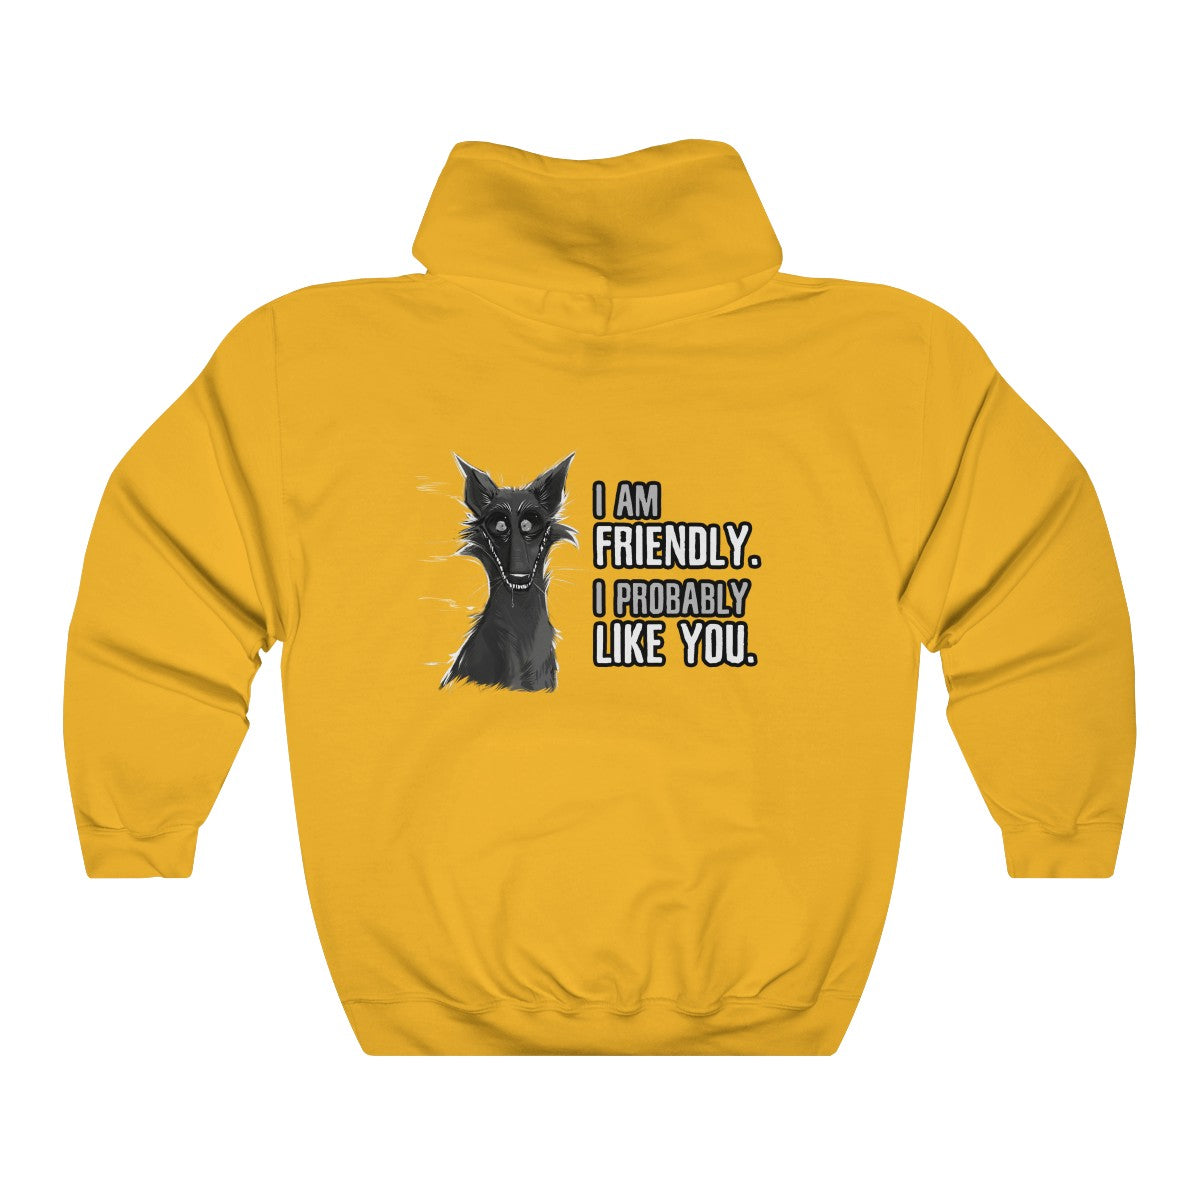 I probably DON'T hate you - Hoodie Hoodie Cyamallo Gold S 